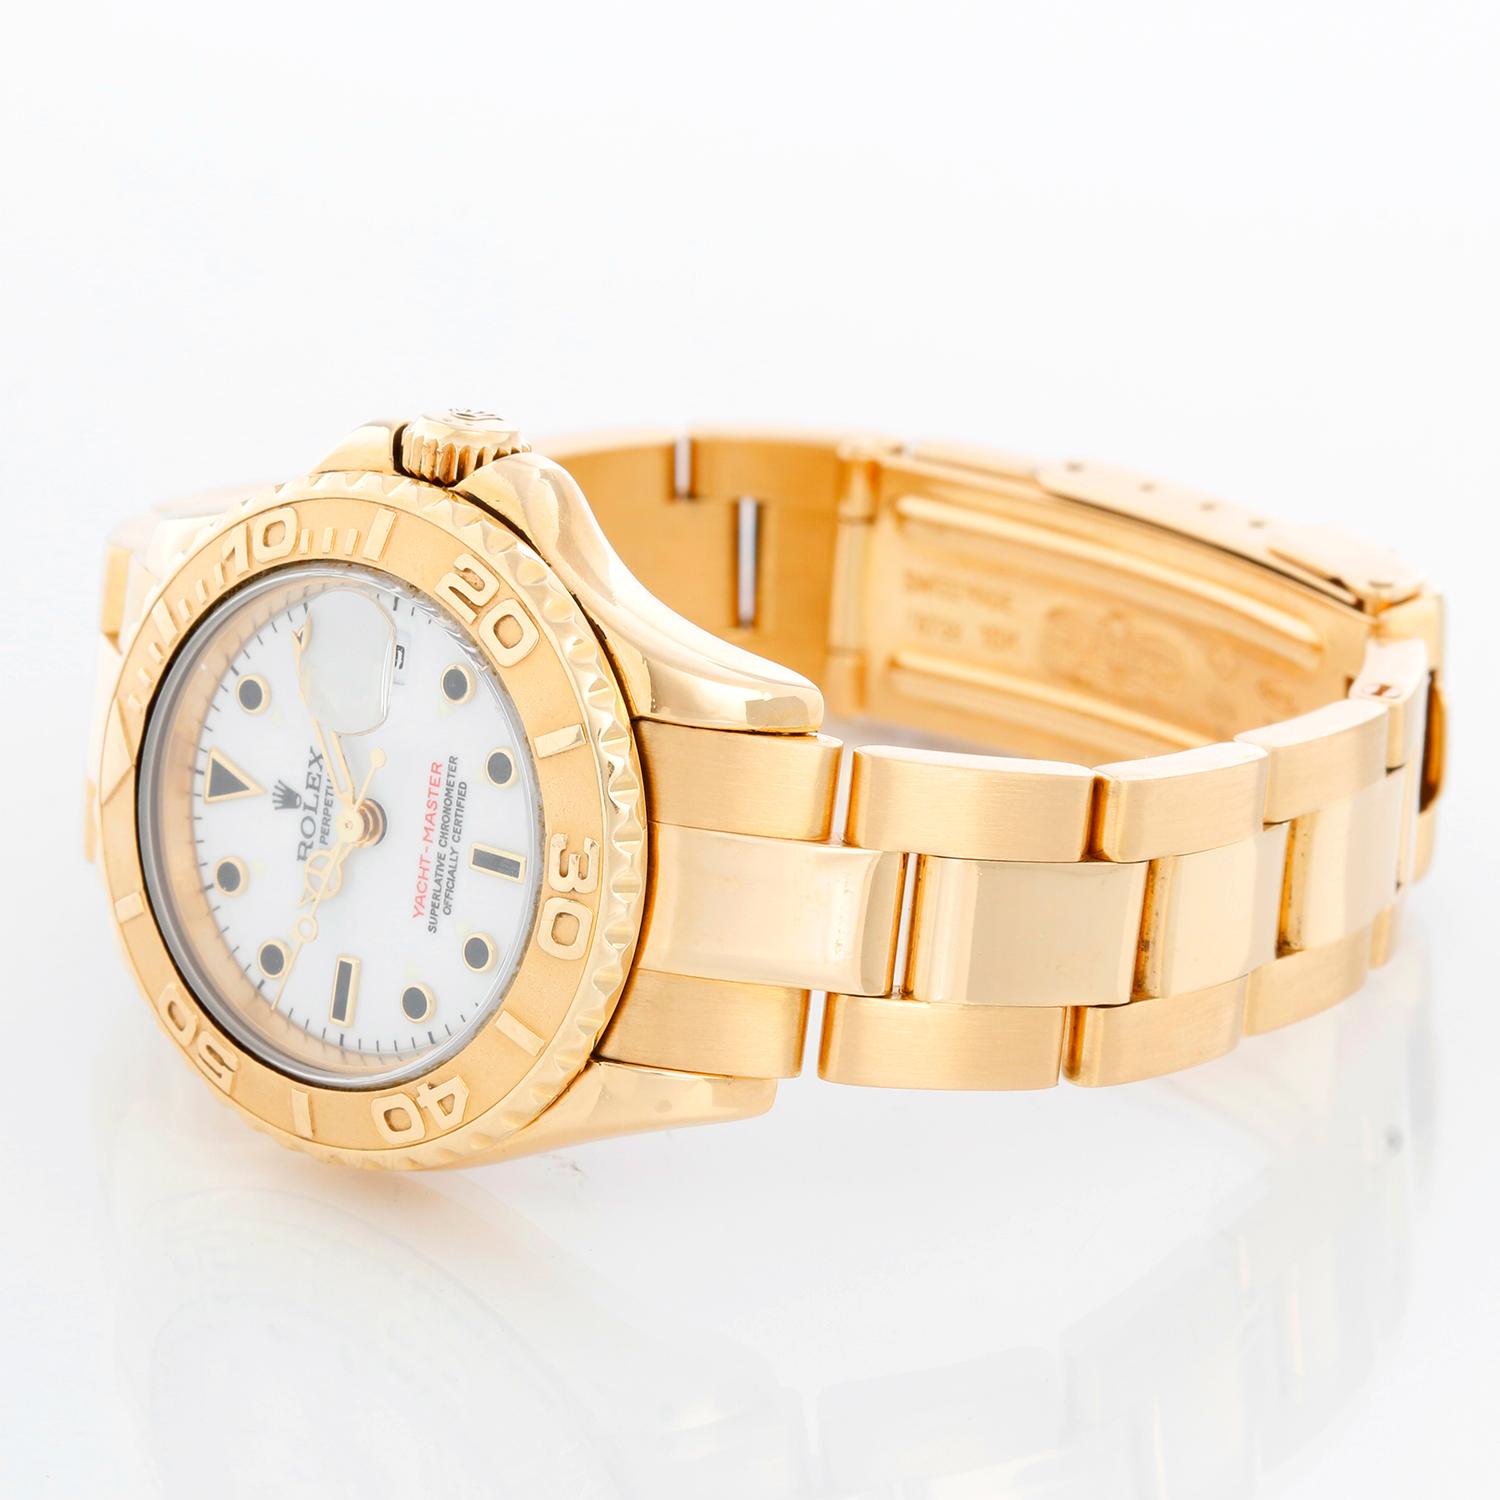 Rolex Lady Yacht-Master 18k Gold Ladies Watch 69628 - Automatic winding, 29 jewels, Quickset date, sapphire crystal. 18k yellow gold case with rotating bezel (29mm diameter). White dial. 18k yellow gold Oyster bracelet with flip-lock clasp.